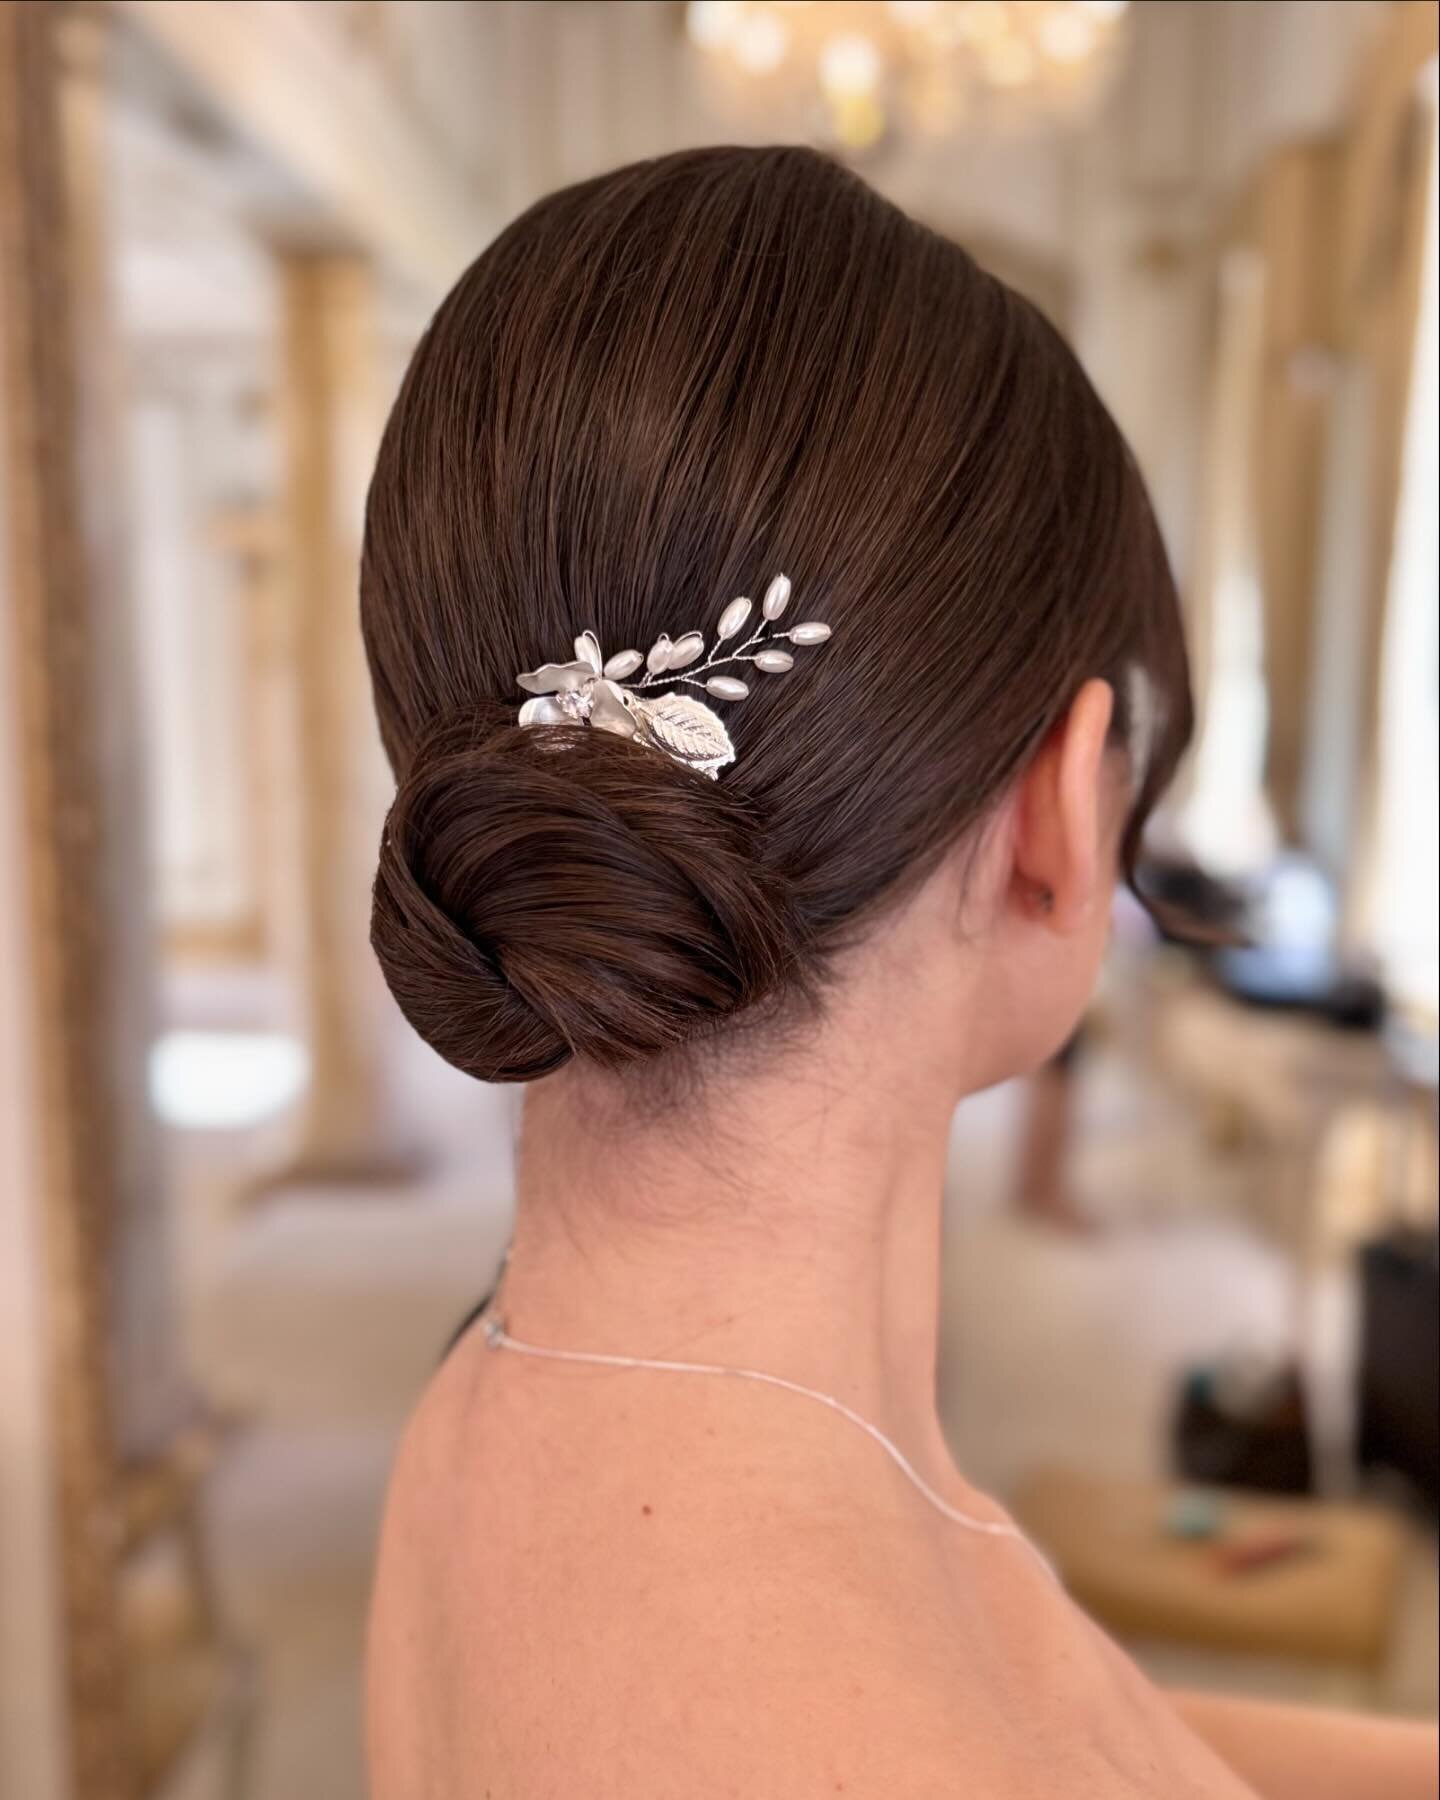 Simplicity 💖 Bridesmaids inspo &hellip;. Love this red carpet low chignon🤩 Ultimately, it will withstand the heat of the hot summers day, or the drizzle we get on a fresh spring day.👌
It&rsquo;s perfect on any hair type looks sophisticated and nea